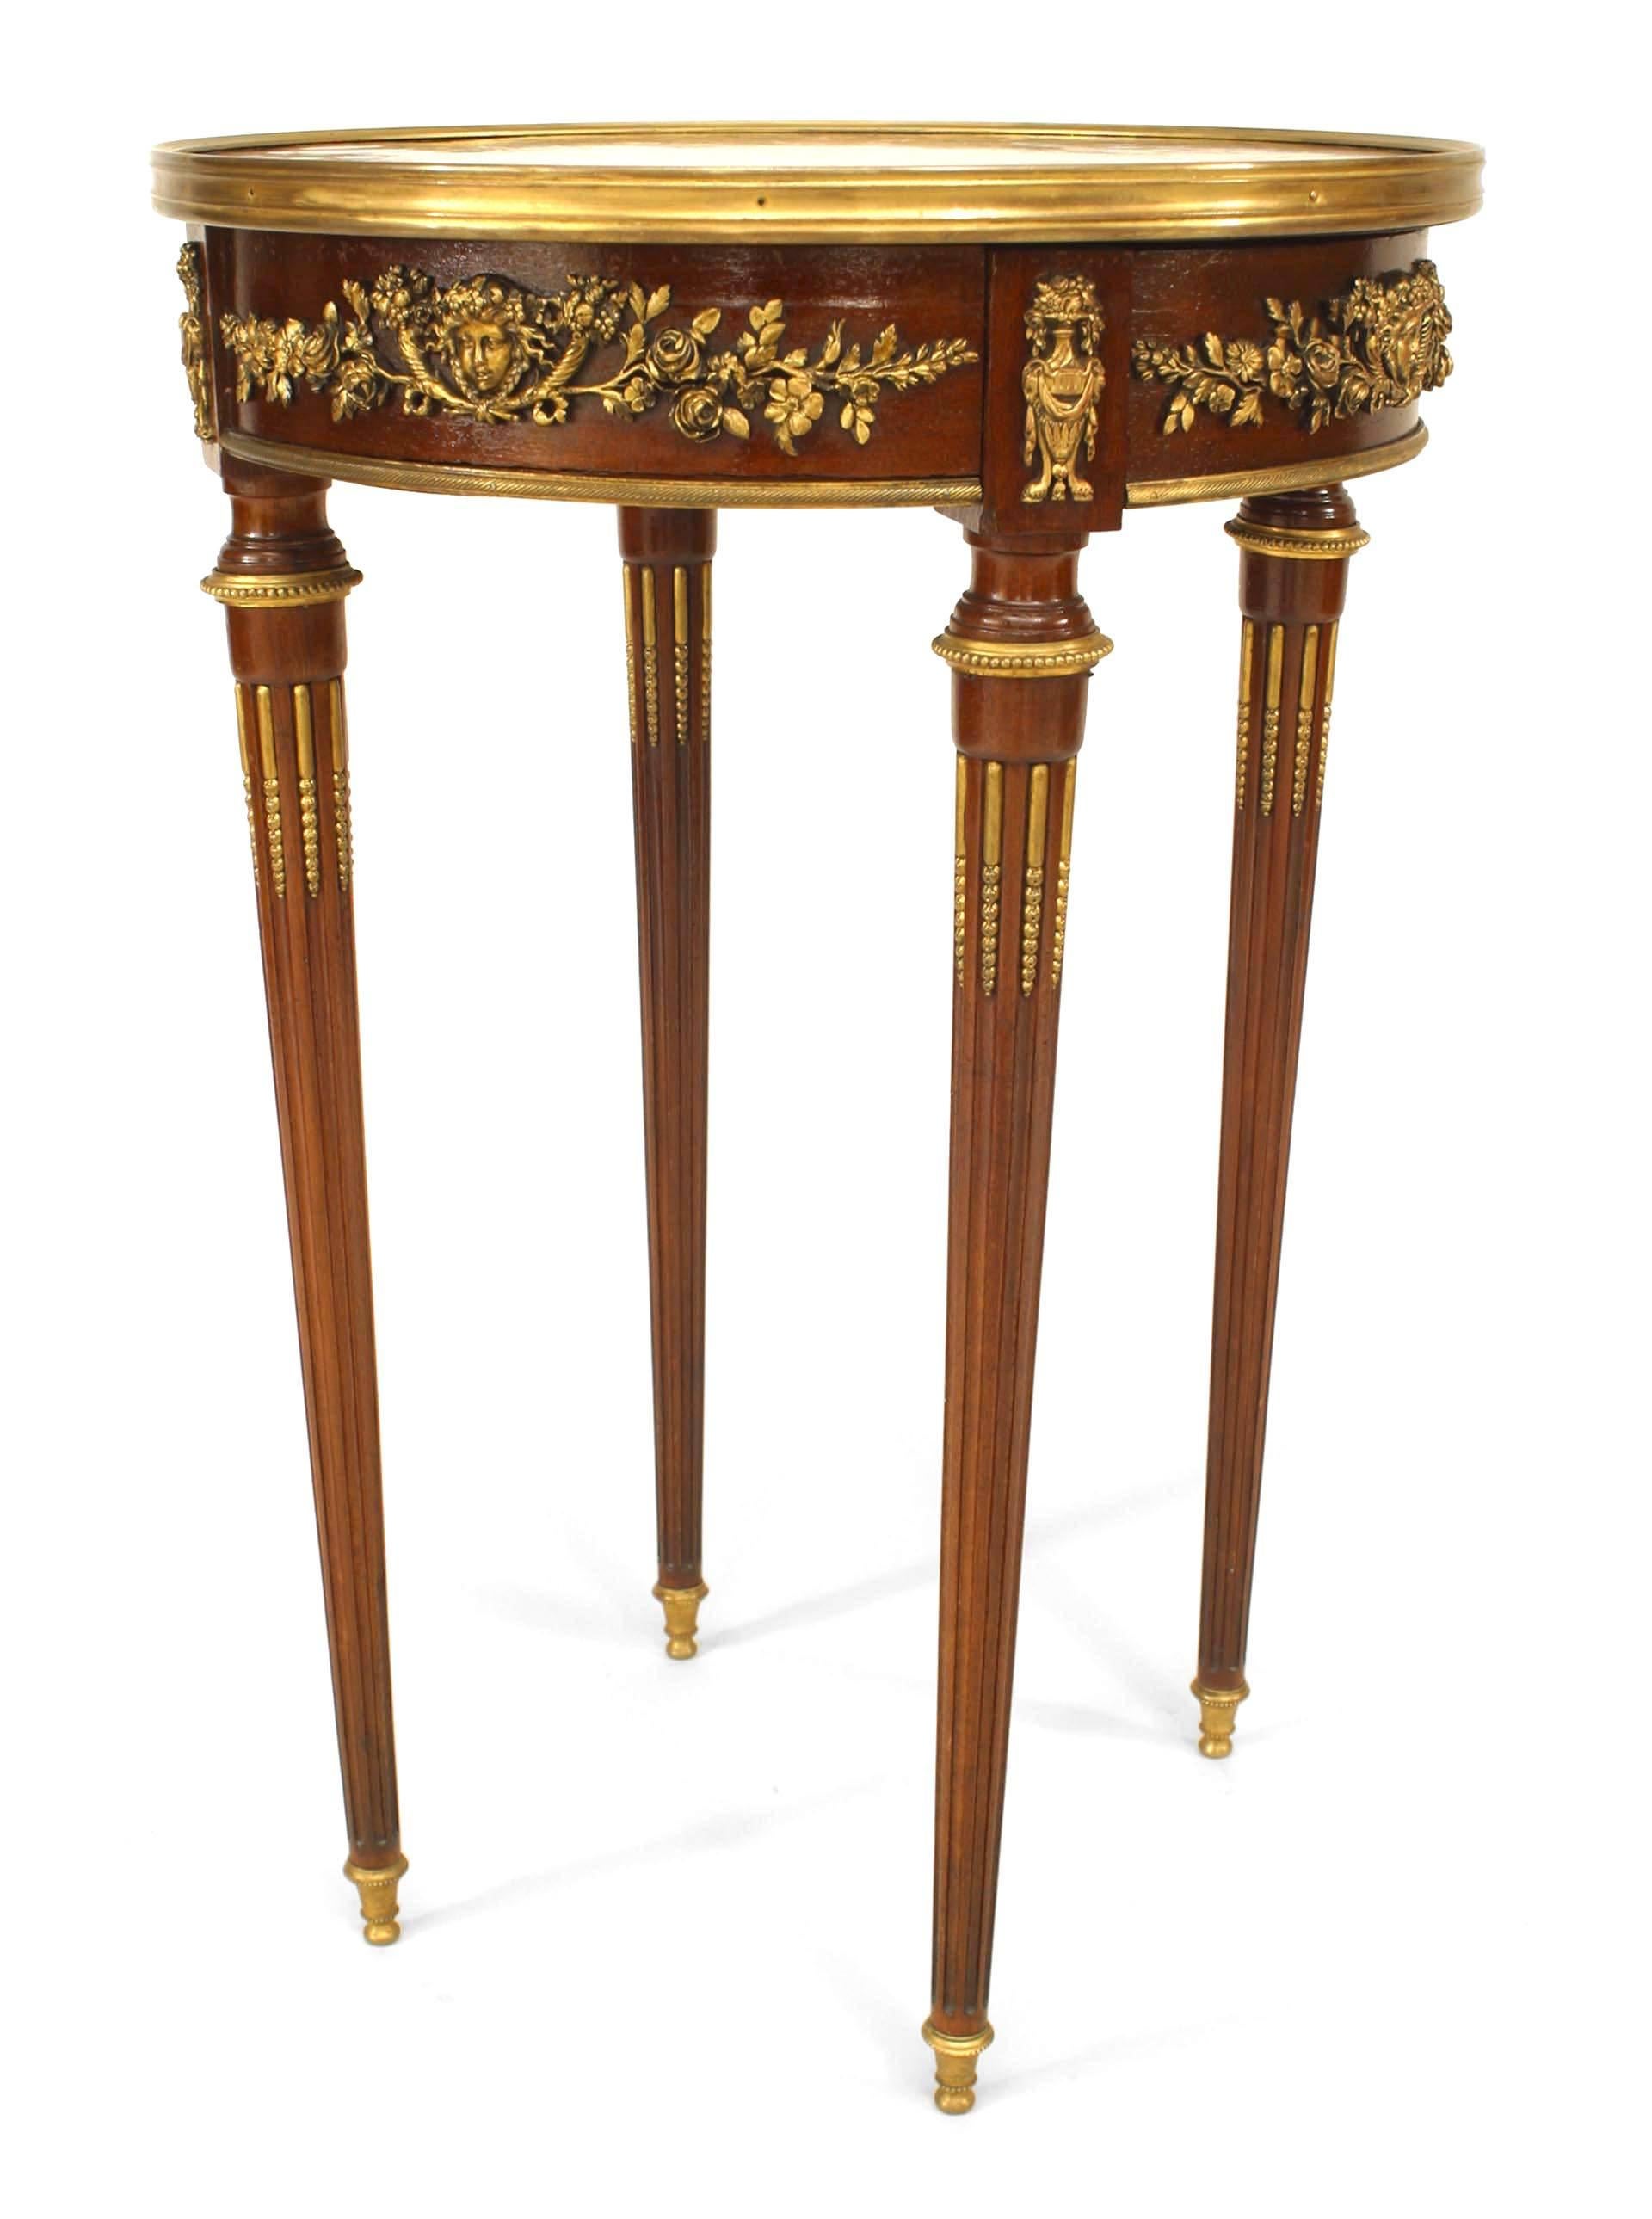 French Louis XVI-style (19th Century) round mahogany end table with bronze floral design trim on apron and legs with a parquetry inlaid top having a brass rim and a single drawer.
